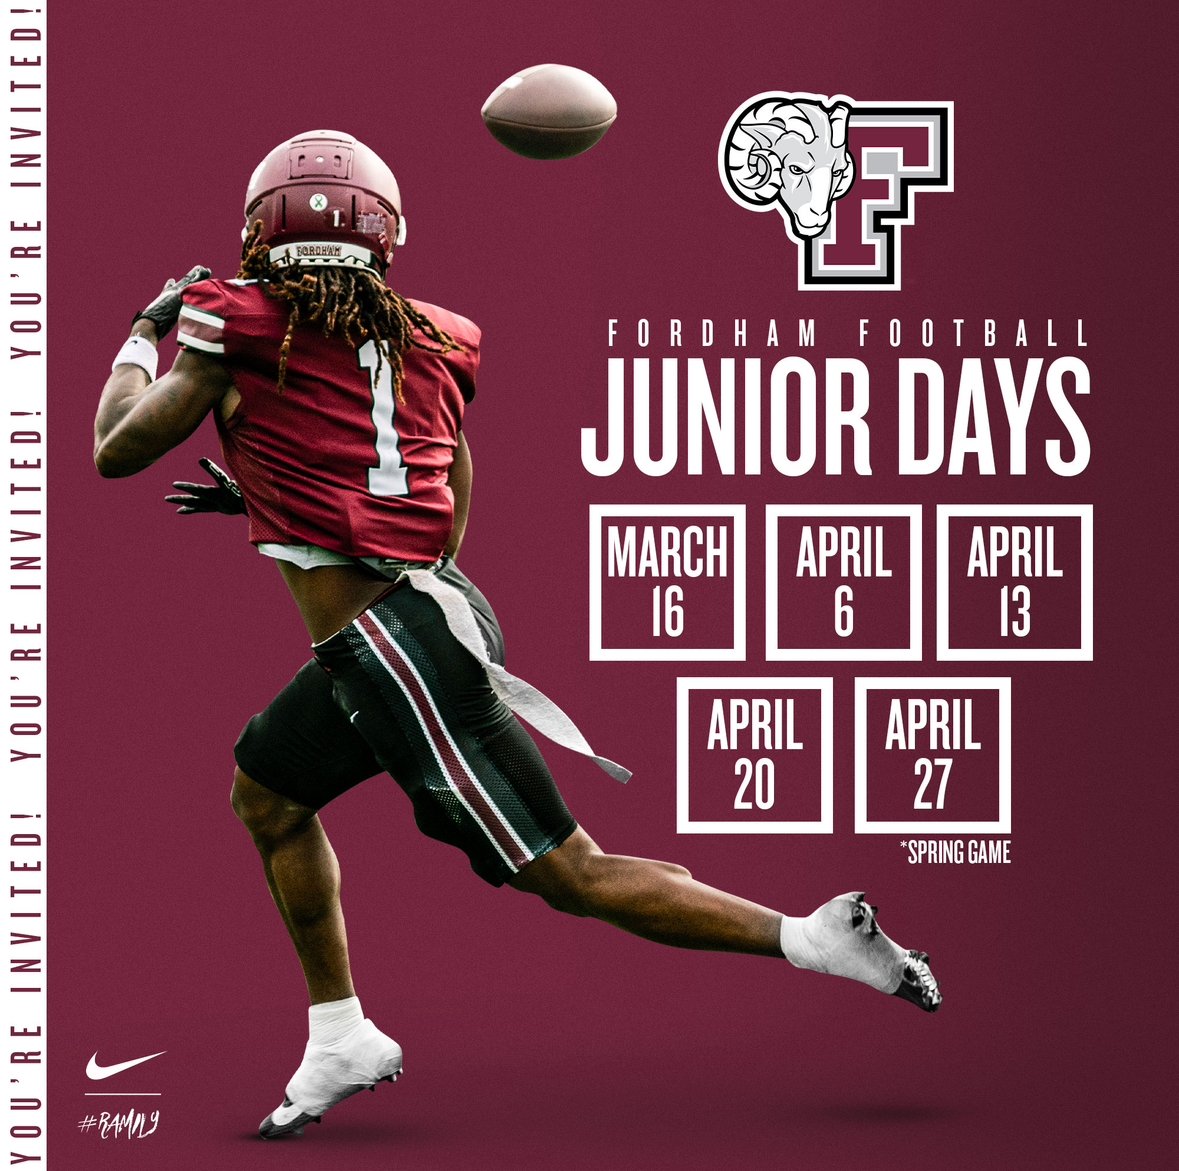 Thank you @CoachPetrarca and @FORDHAMFOOTBALL for the Junior Day invite. Excited to get on campus March 16th. #Ramily @LoomisFootball